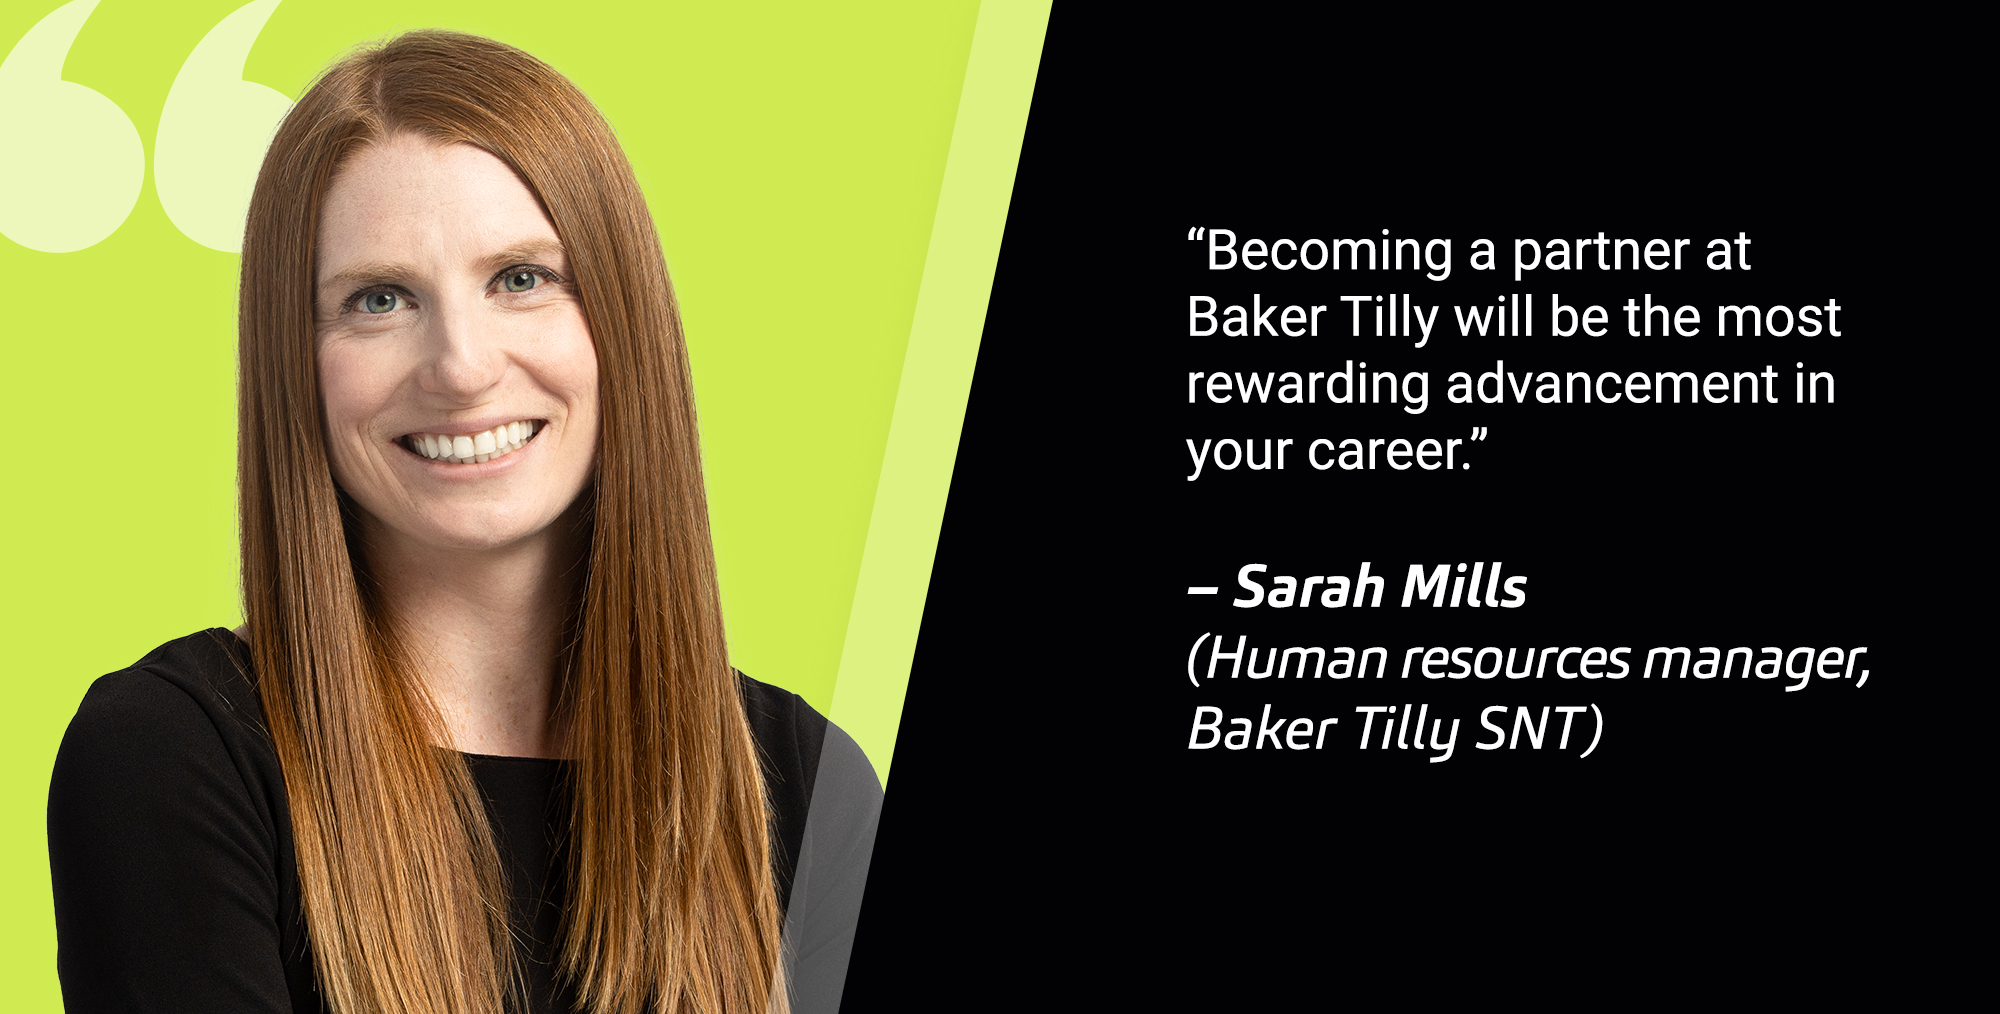 'Becoming a partner at Baker Tilly will be the most rewarding advancement in your career.' – Sarah Mills (Human Resources manager, Baker Tilly SNT)